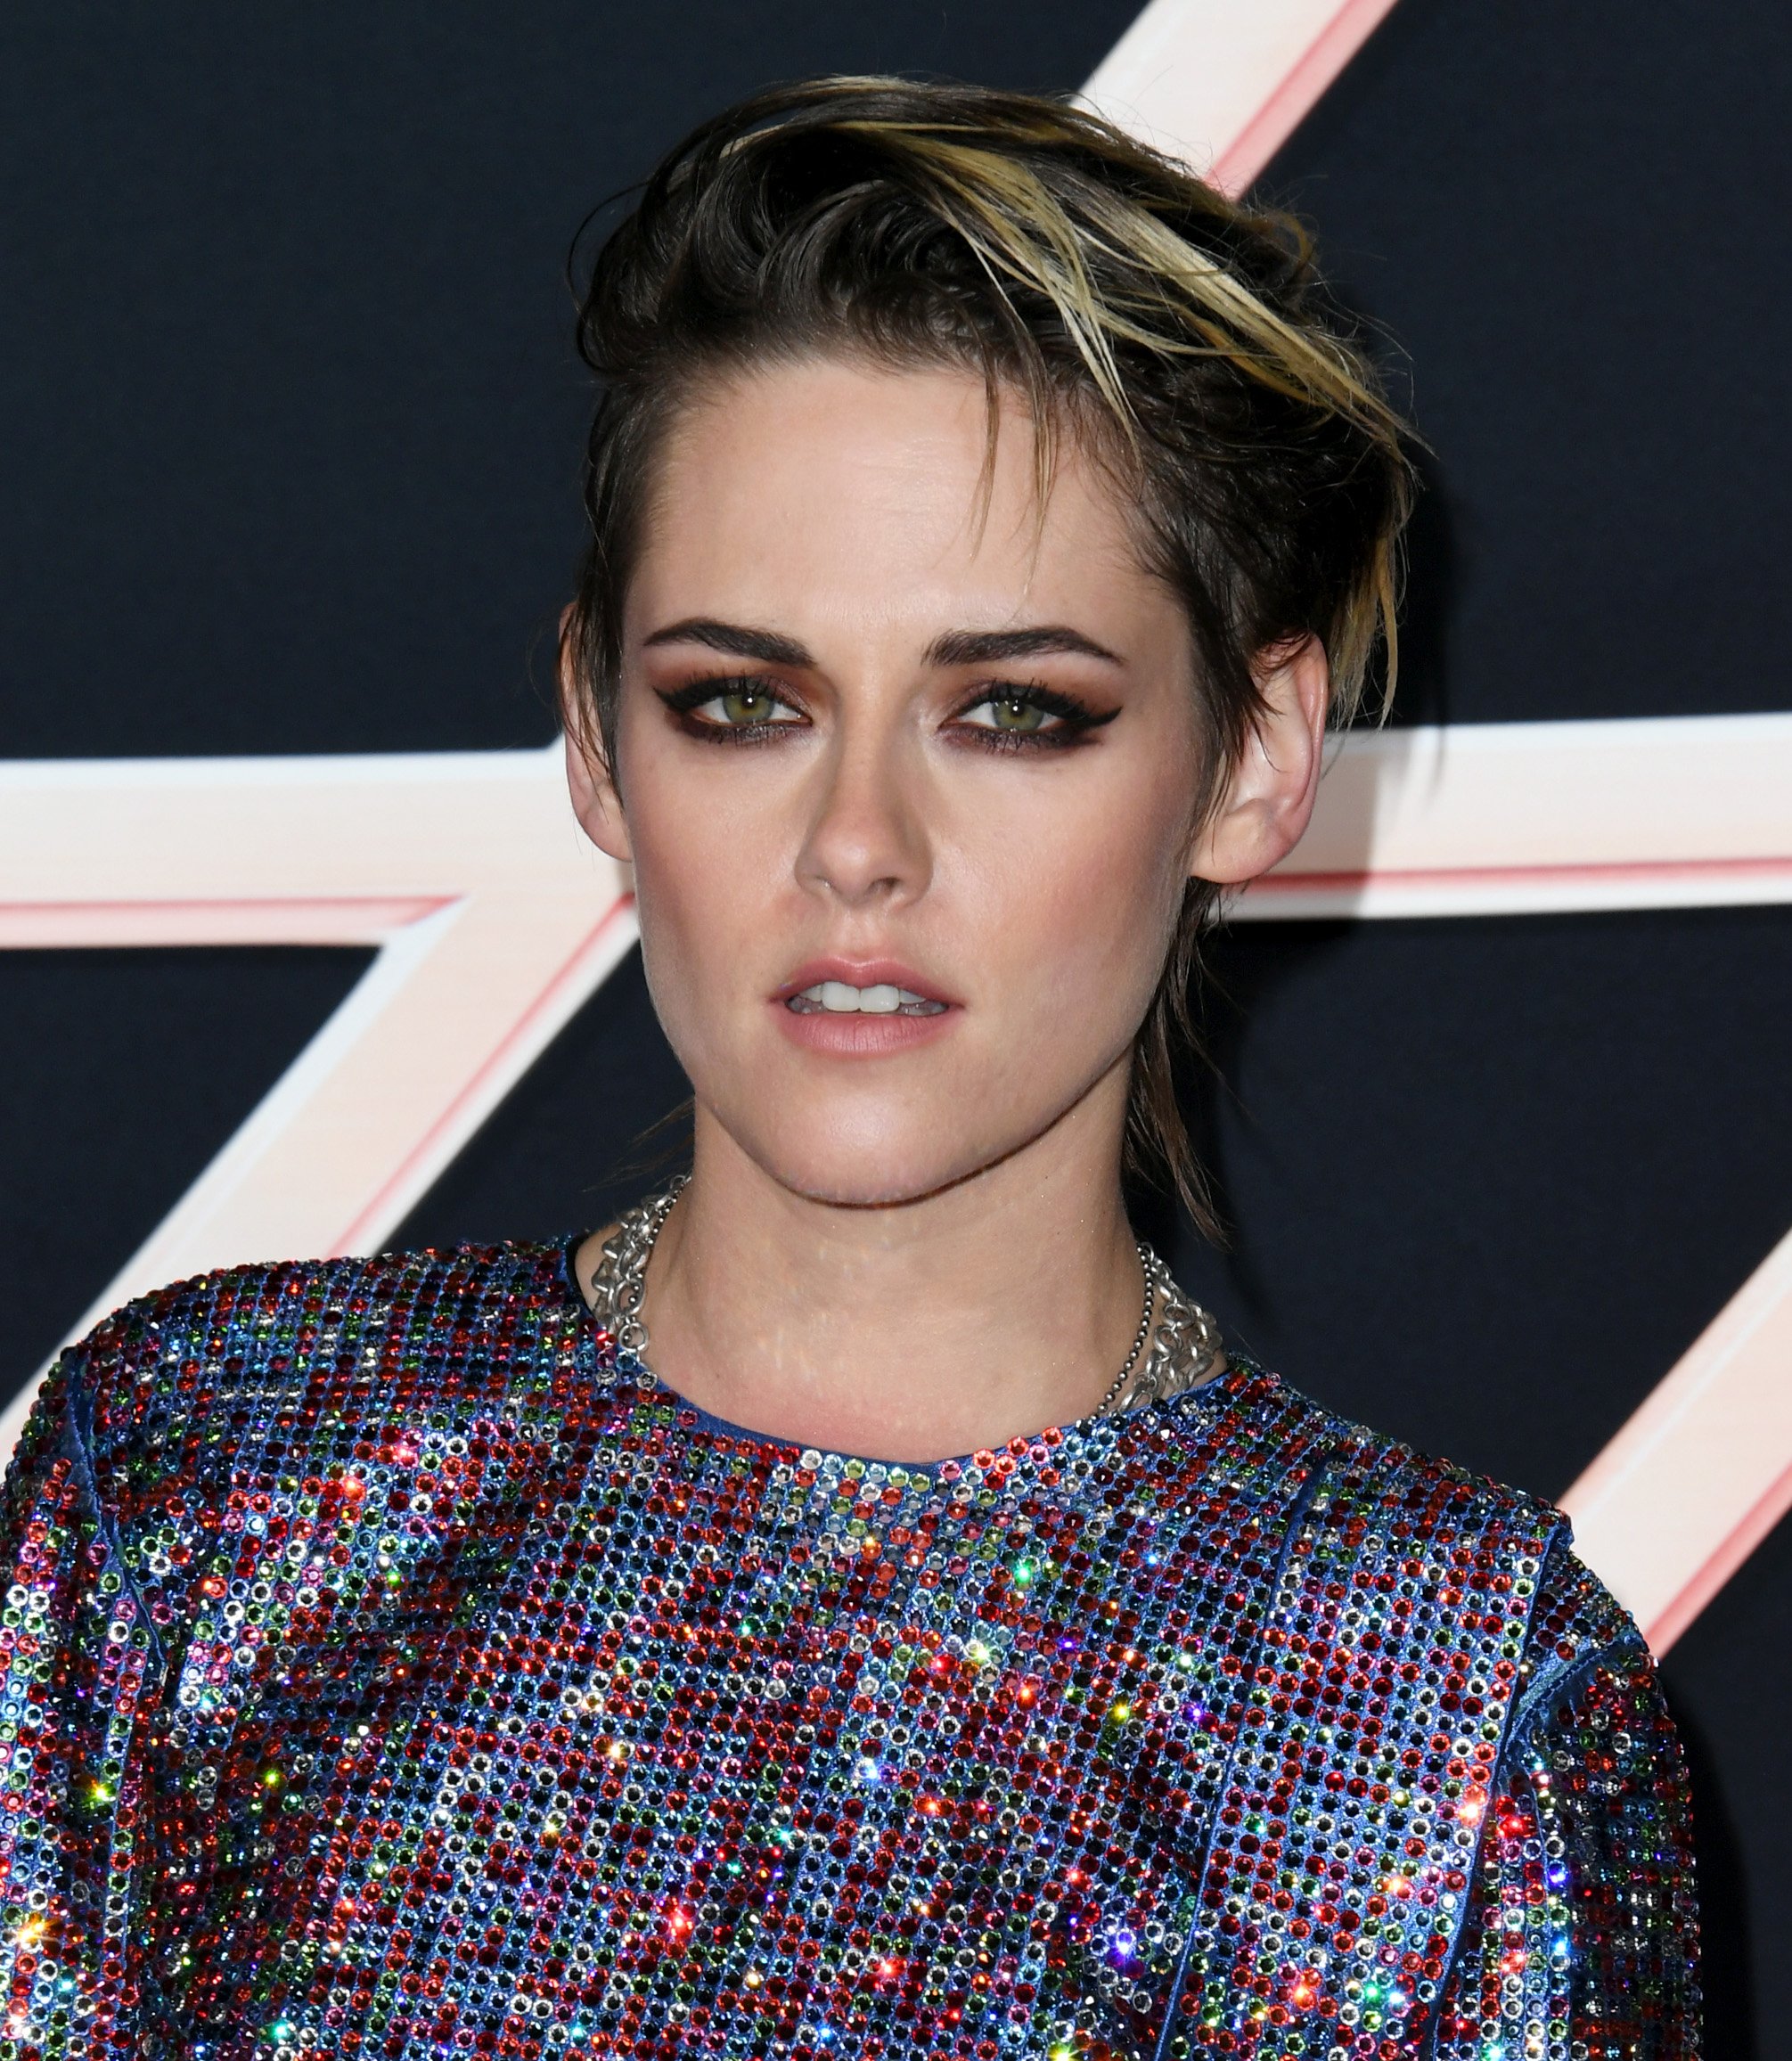 Kristen Stewart attends the premiere of "Charlie's Angels" at Westwood Regency Theater on November 11, 2019 in Los Angeles, California | Photo: Getty Images